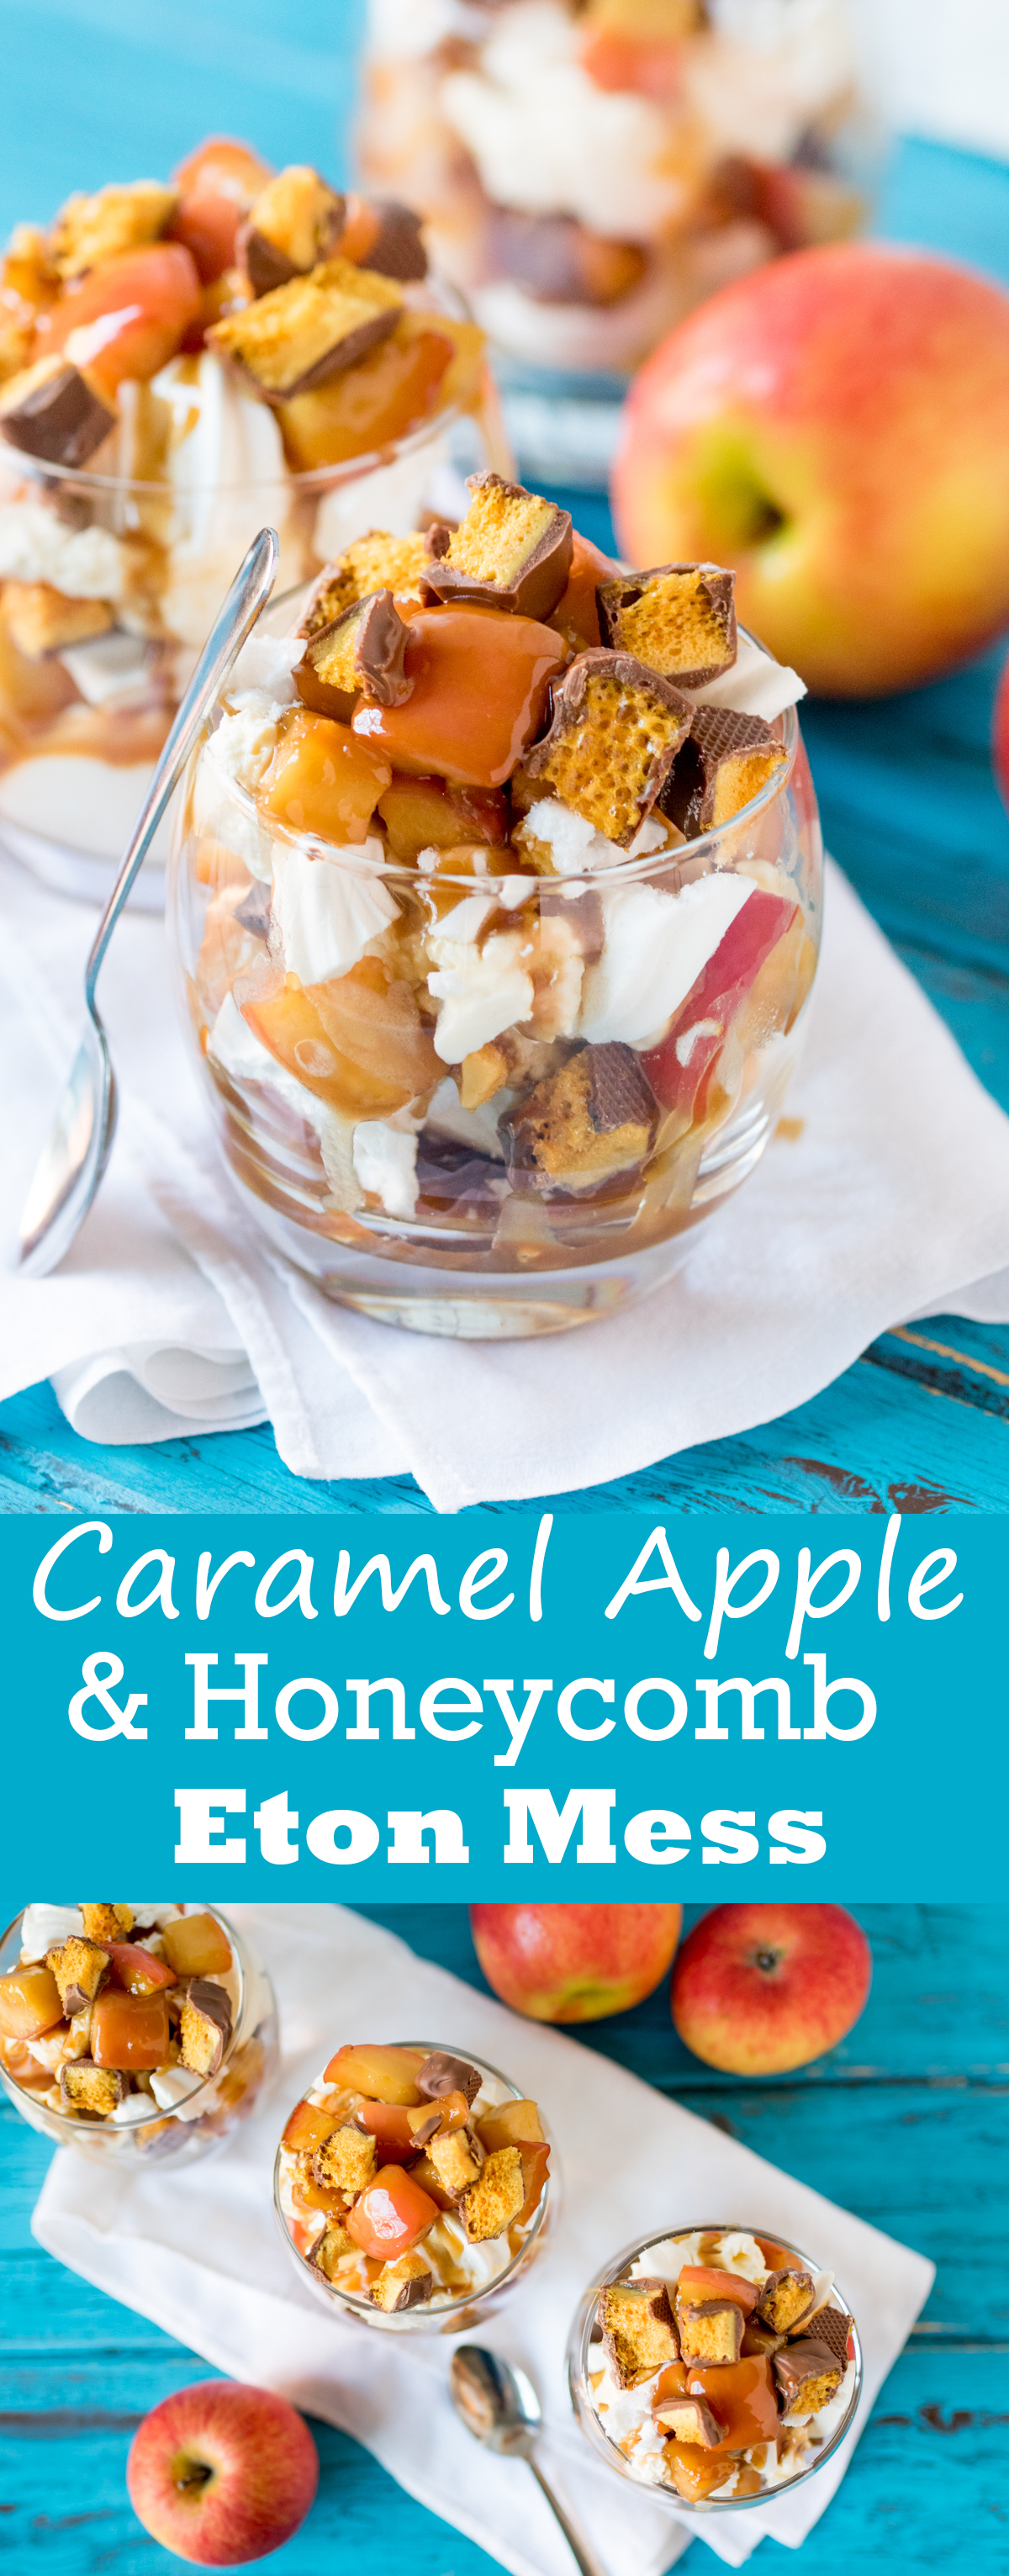 Caramel Apple and Honeycomb Eton Mess – THE dessert for Fall!